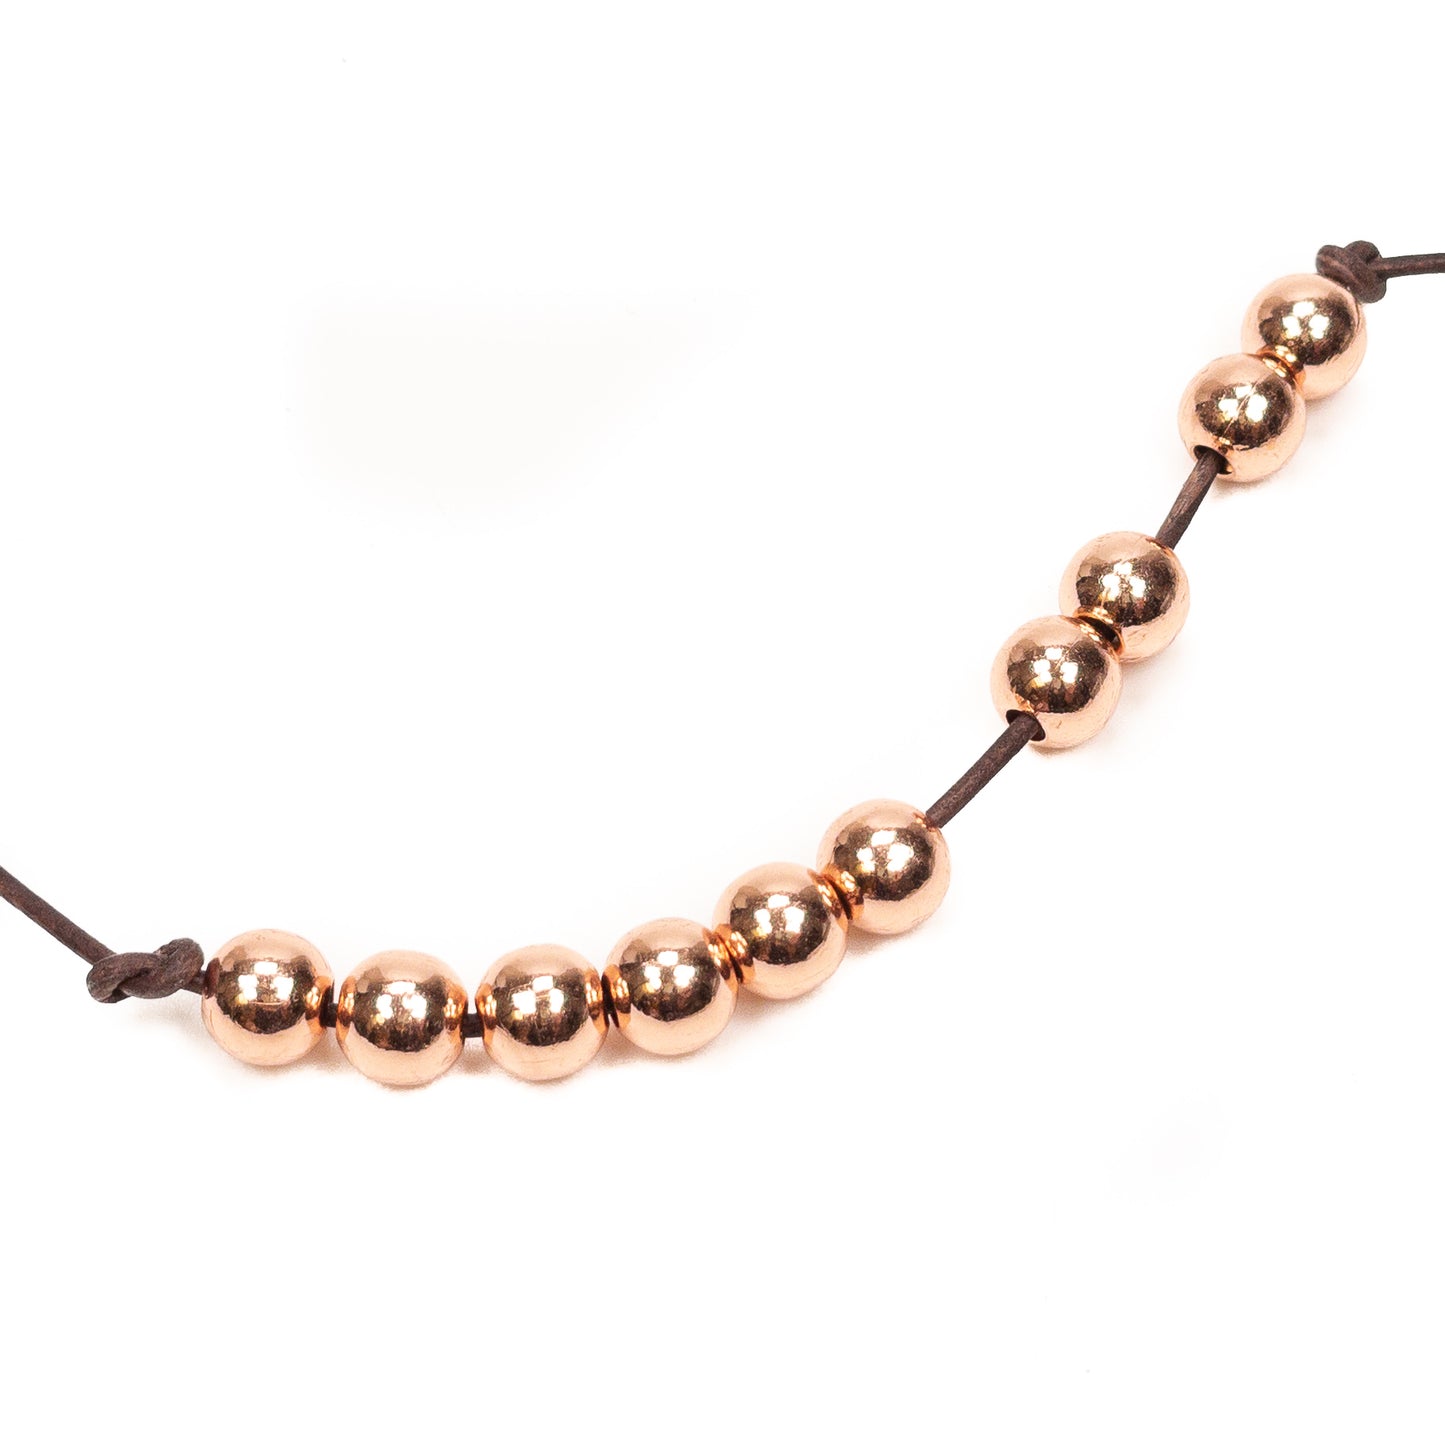 8mm Smooth Round Bead (Copper) - 10 pcs.